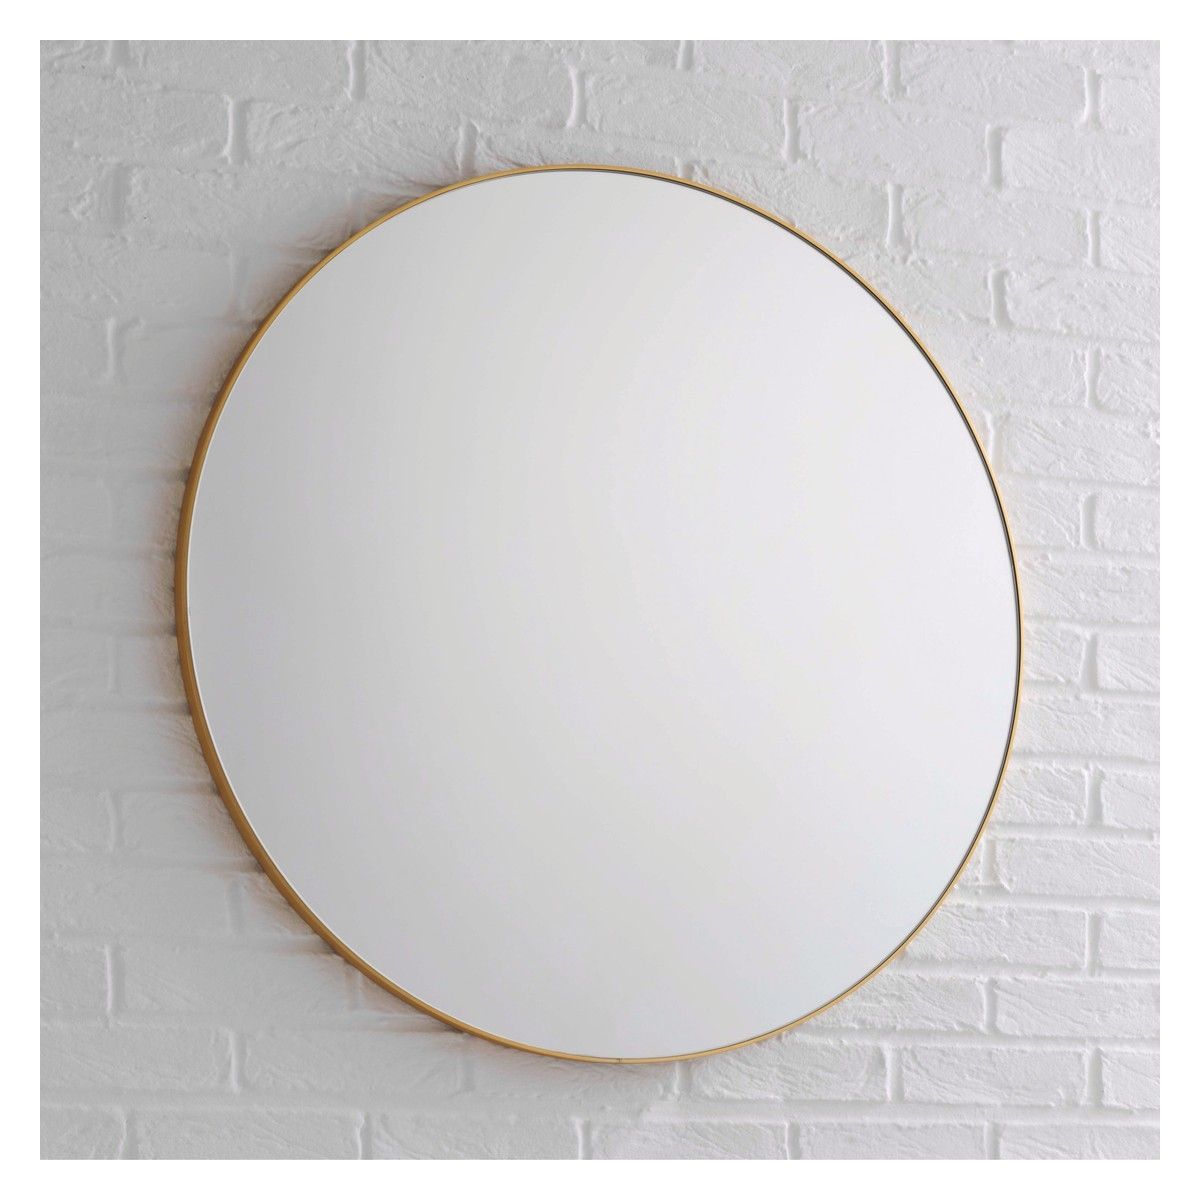 Patsy Large Round Gold Wall Mirror D82cm Buy Now At Habitat Uk Throughout Large Round Mirrors For Sale (View 11 of 15)